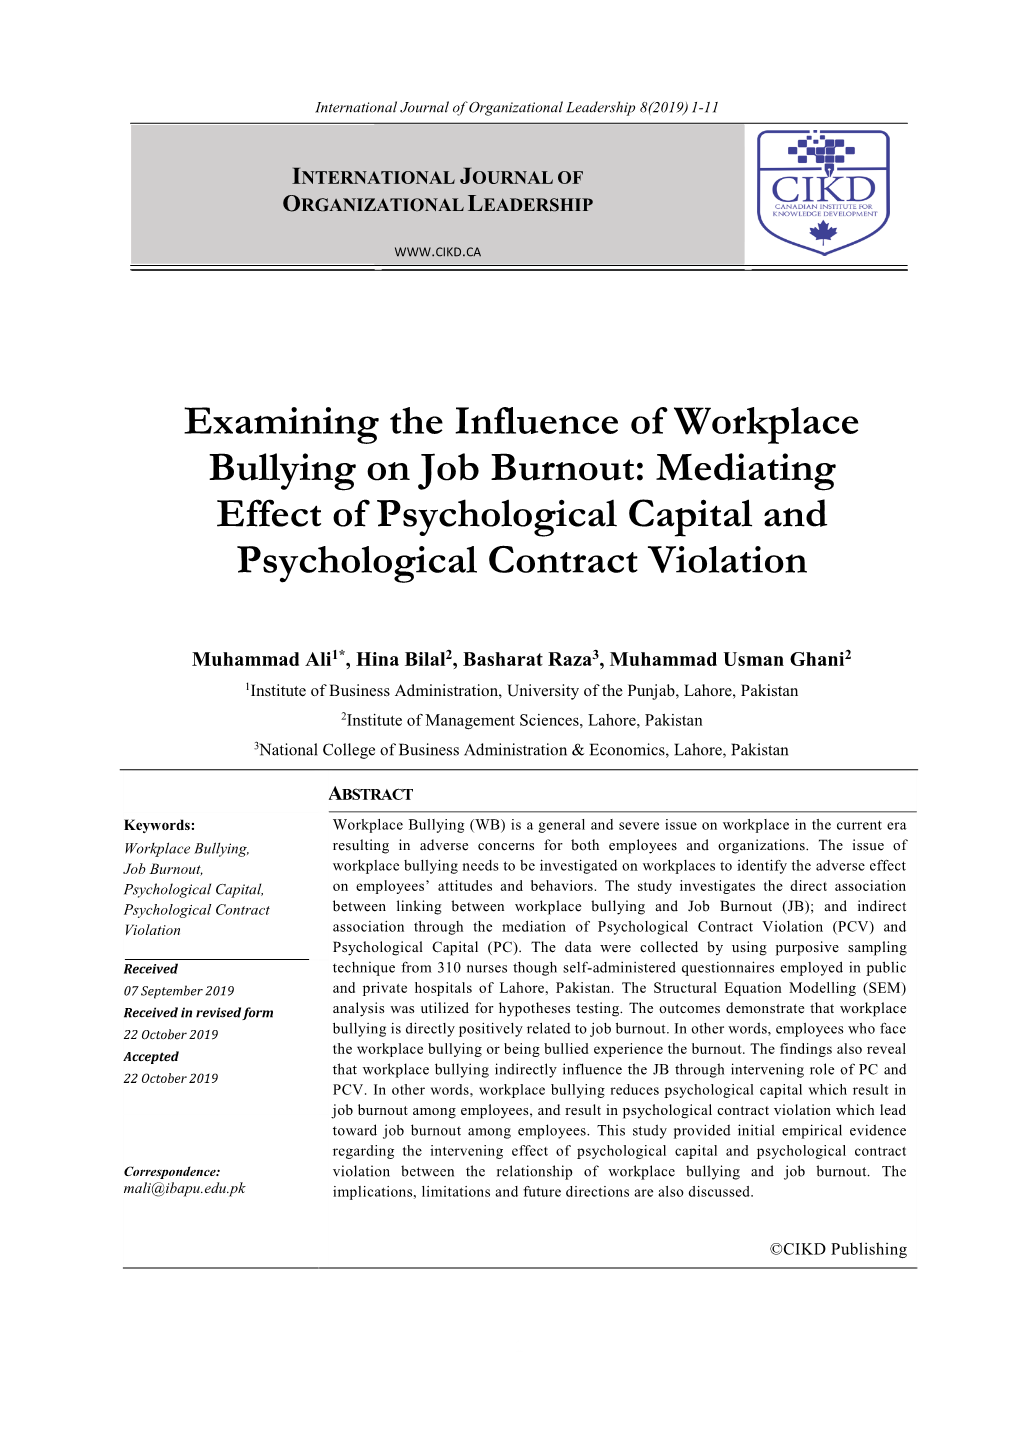 Examining the Influence of Workplace Bullying on Job Burnout: Mediating Effect of Psychological Capital and Psychological Contract Violation